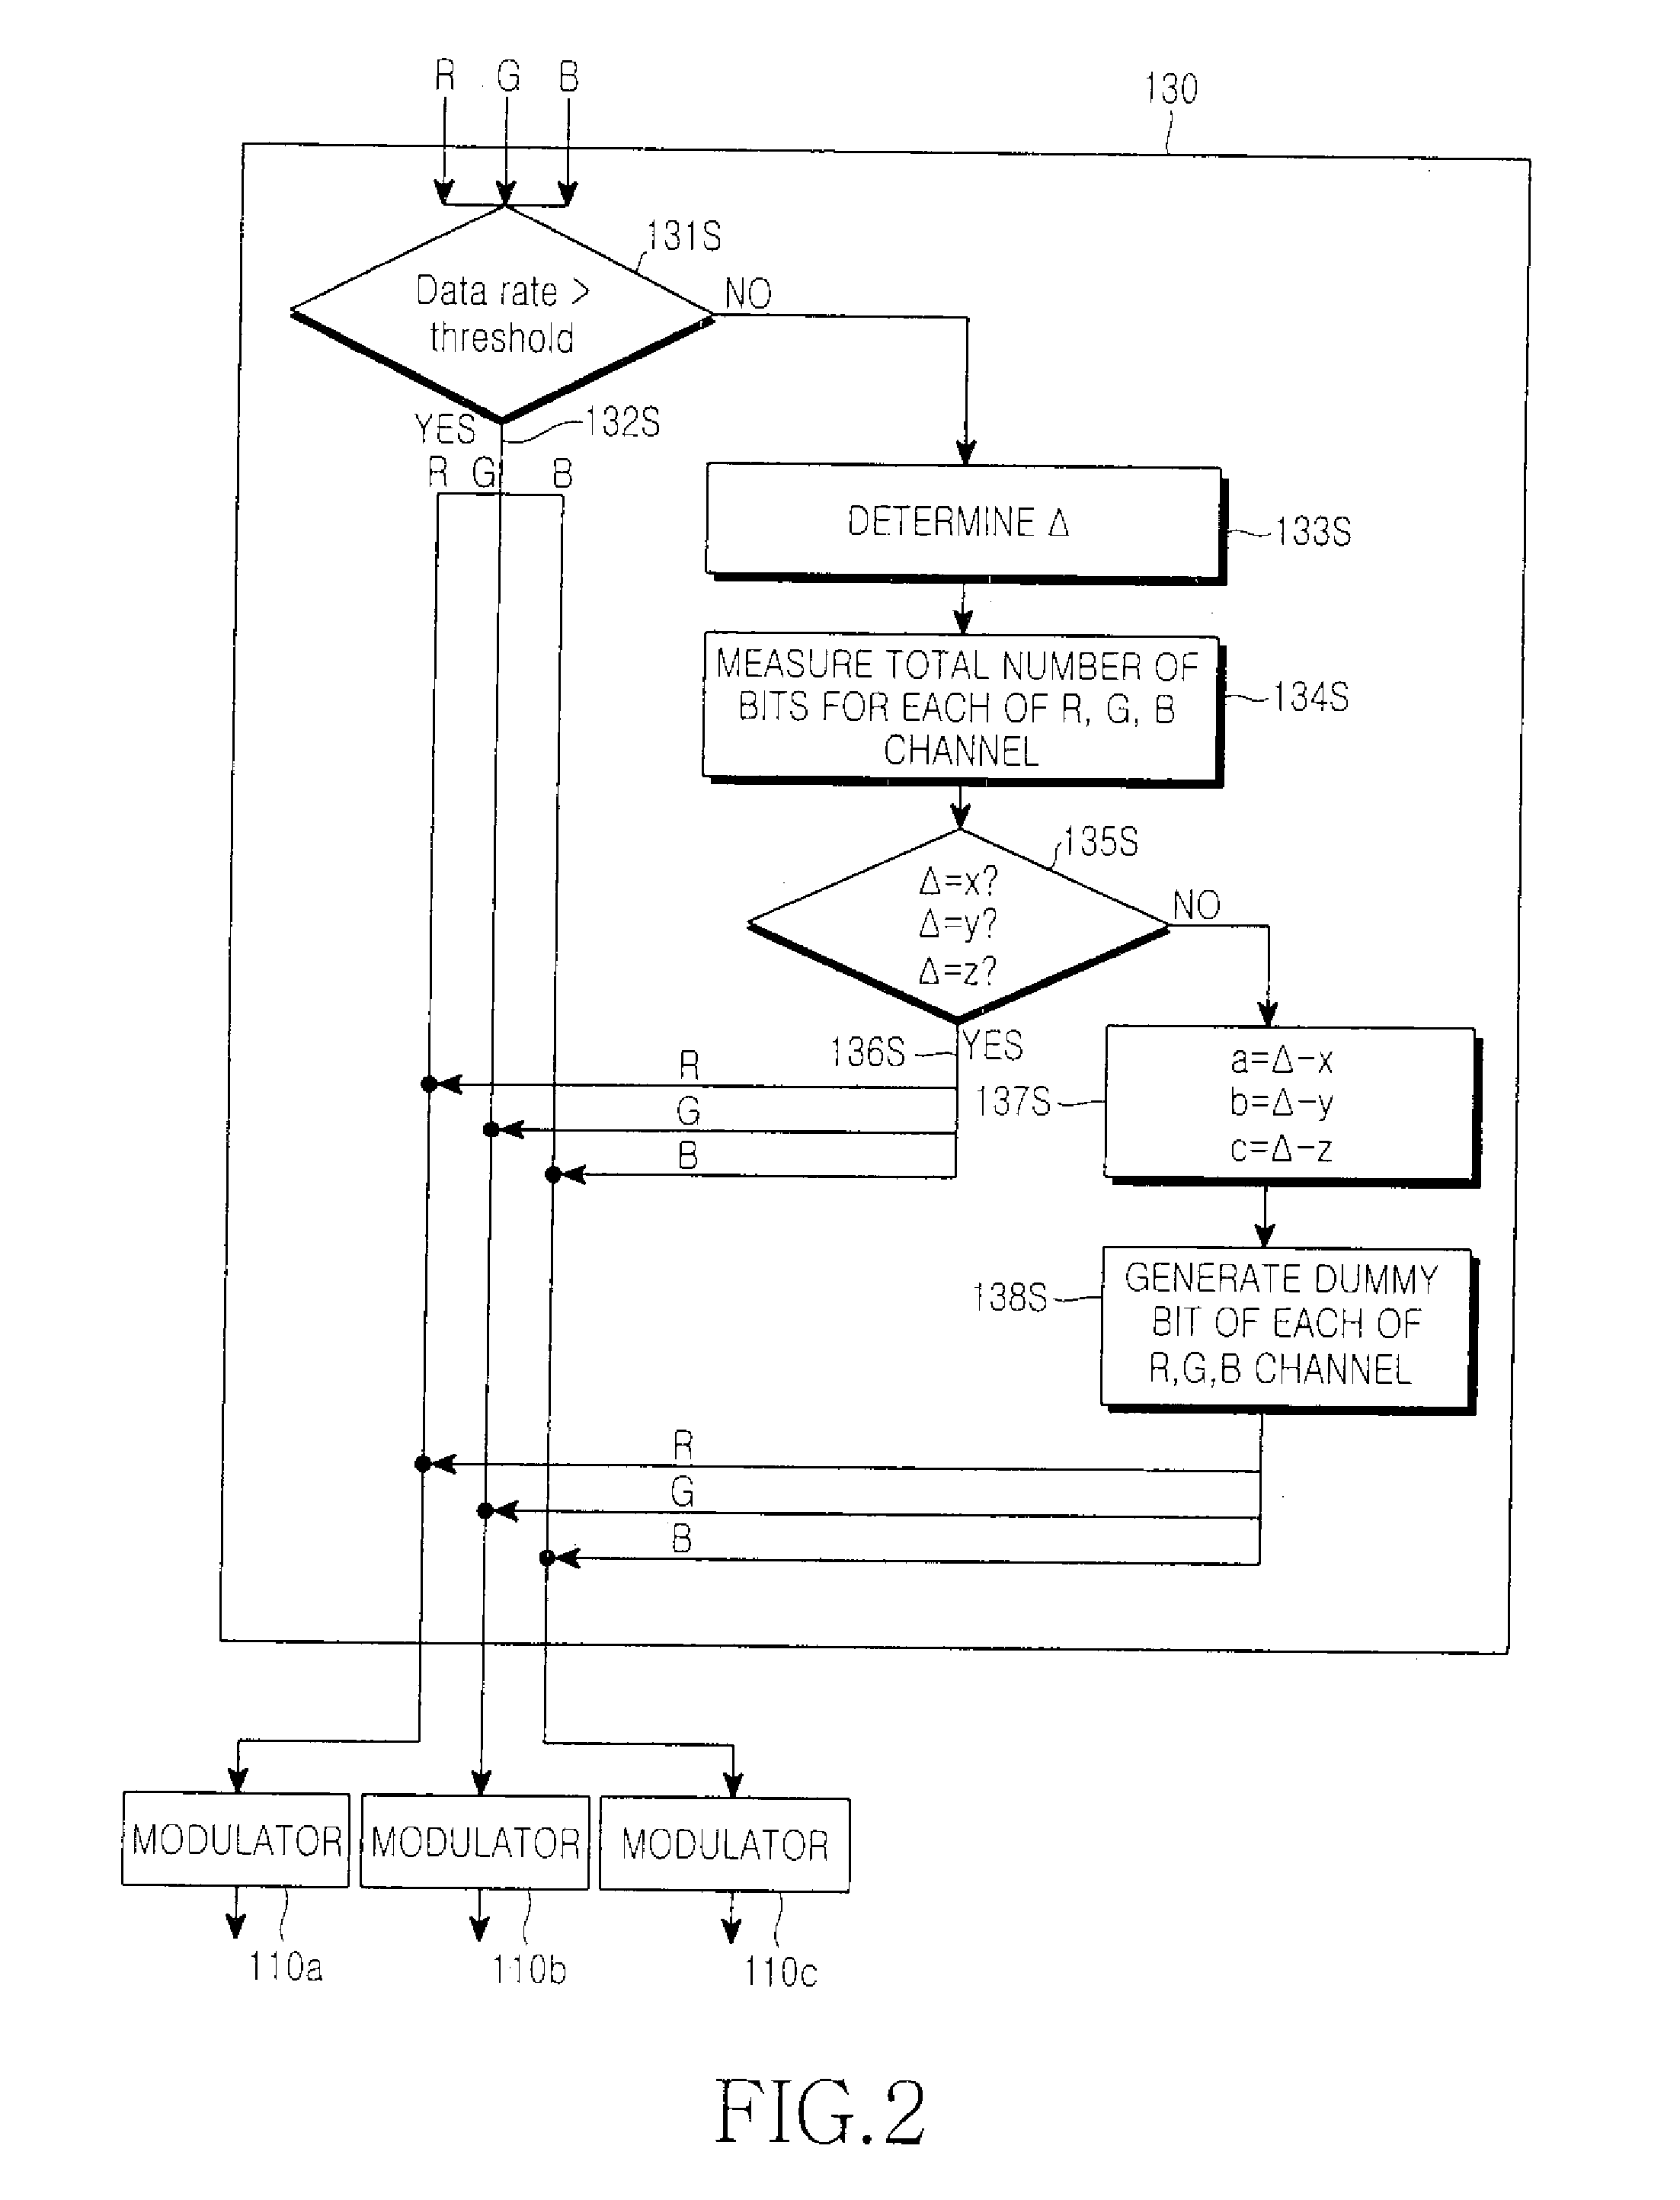 Apparatus and method for visible light communication